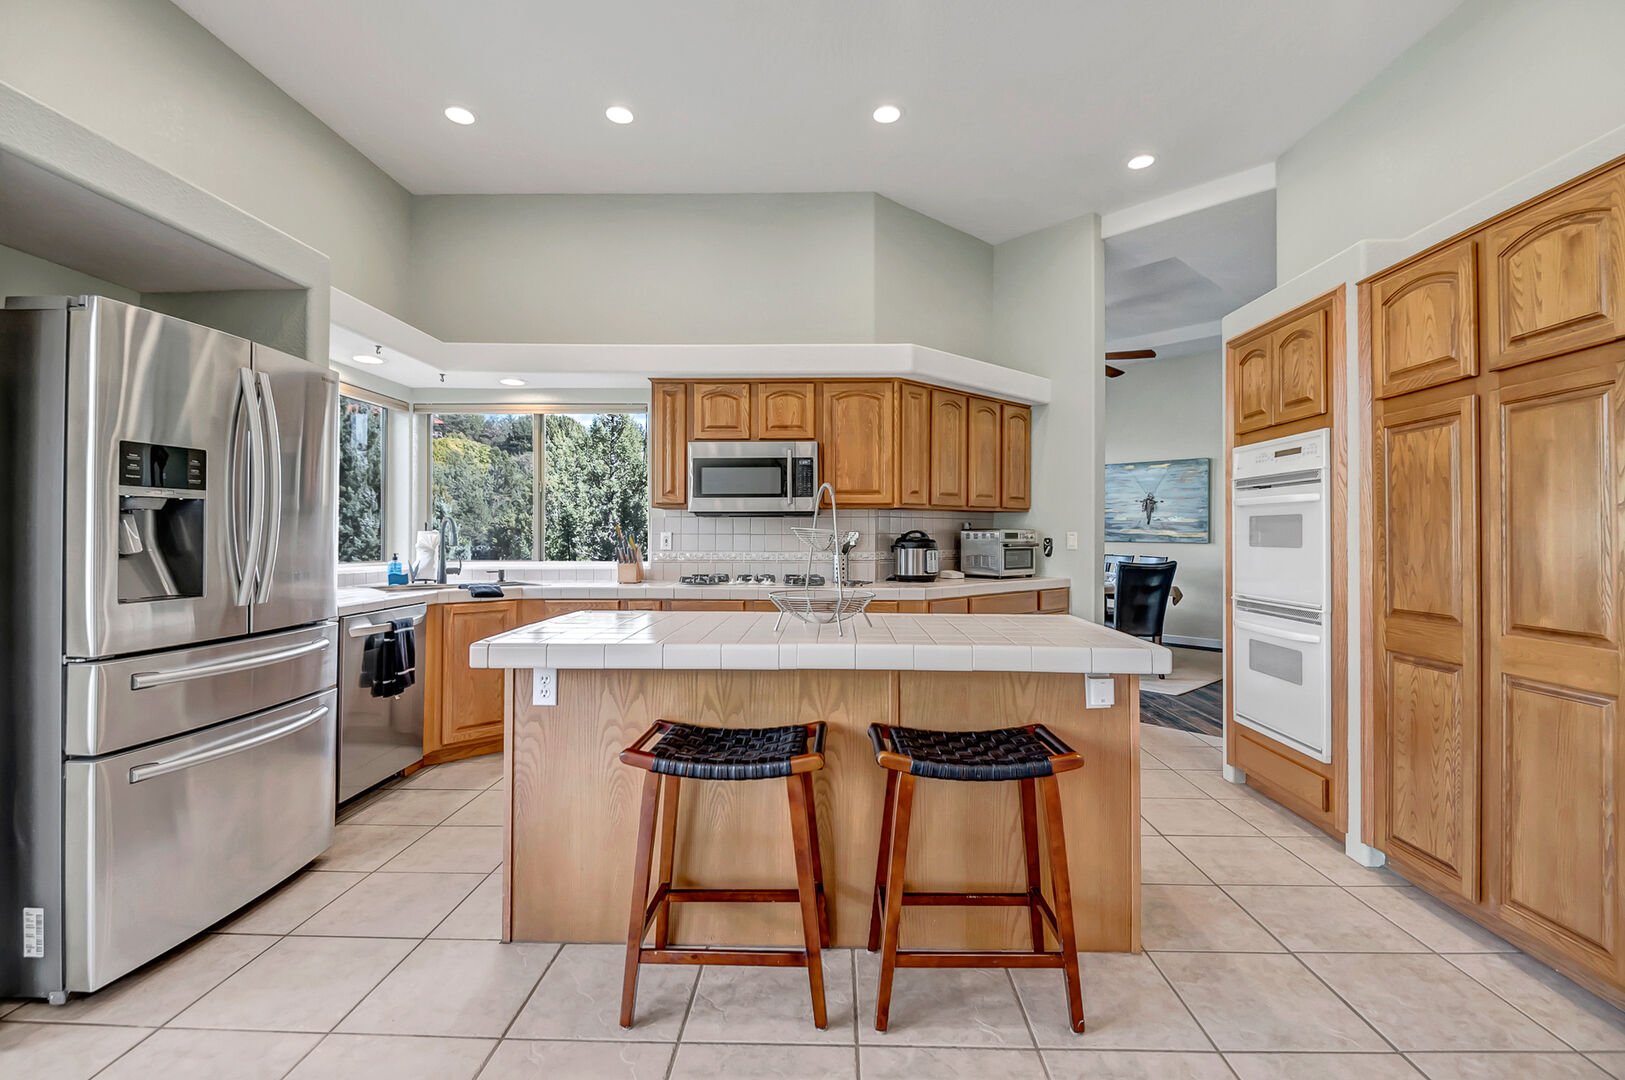 Fully equipped kitchen boasts high-end appliances, a 5-burner gas stove, and island seating for two